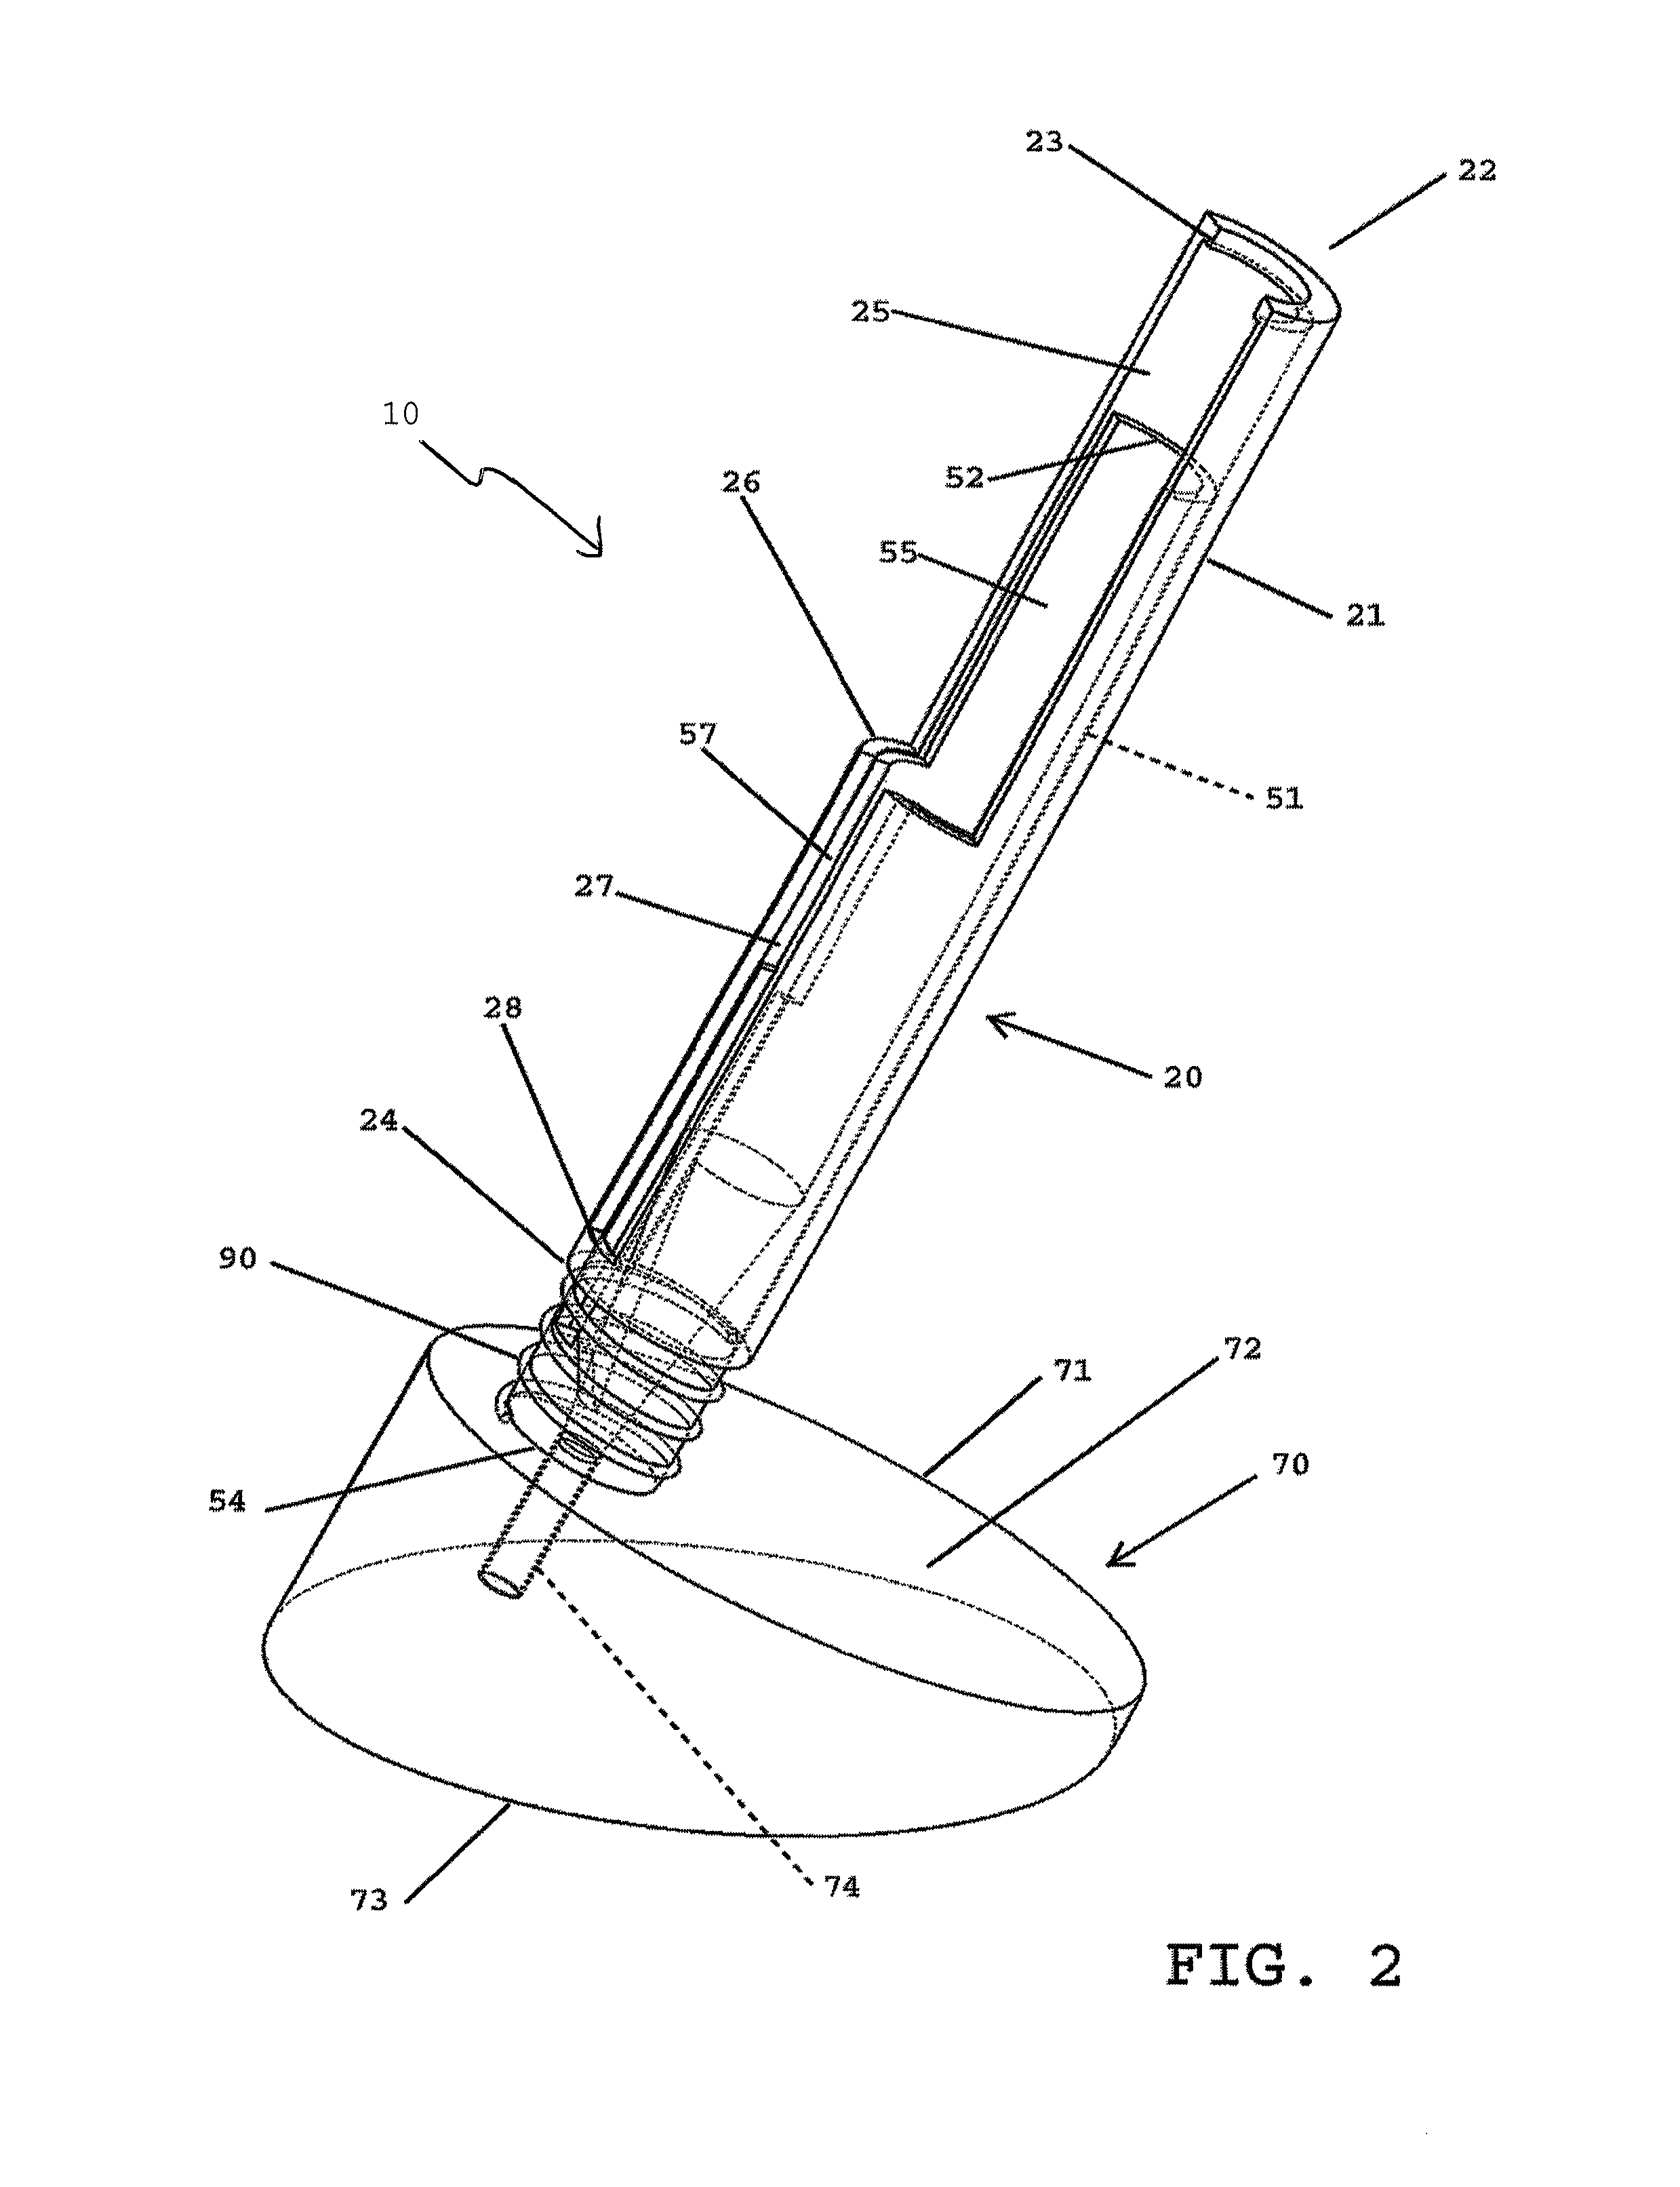 Temporary instrument holder, sharps protector, passing aid and safety transport apparatus